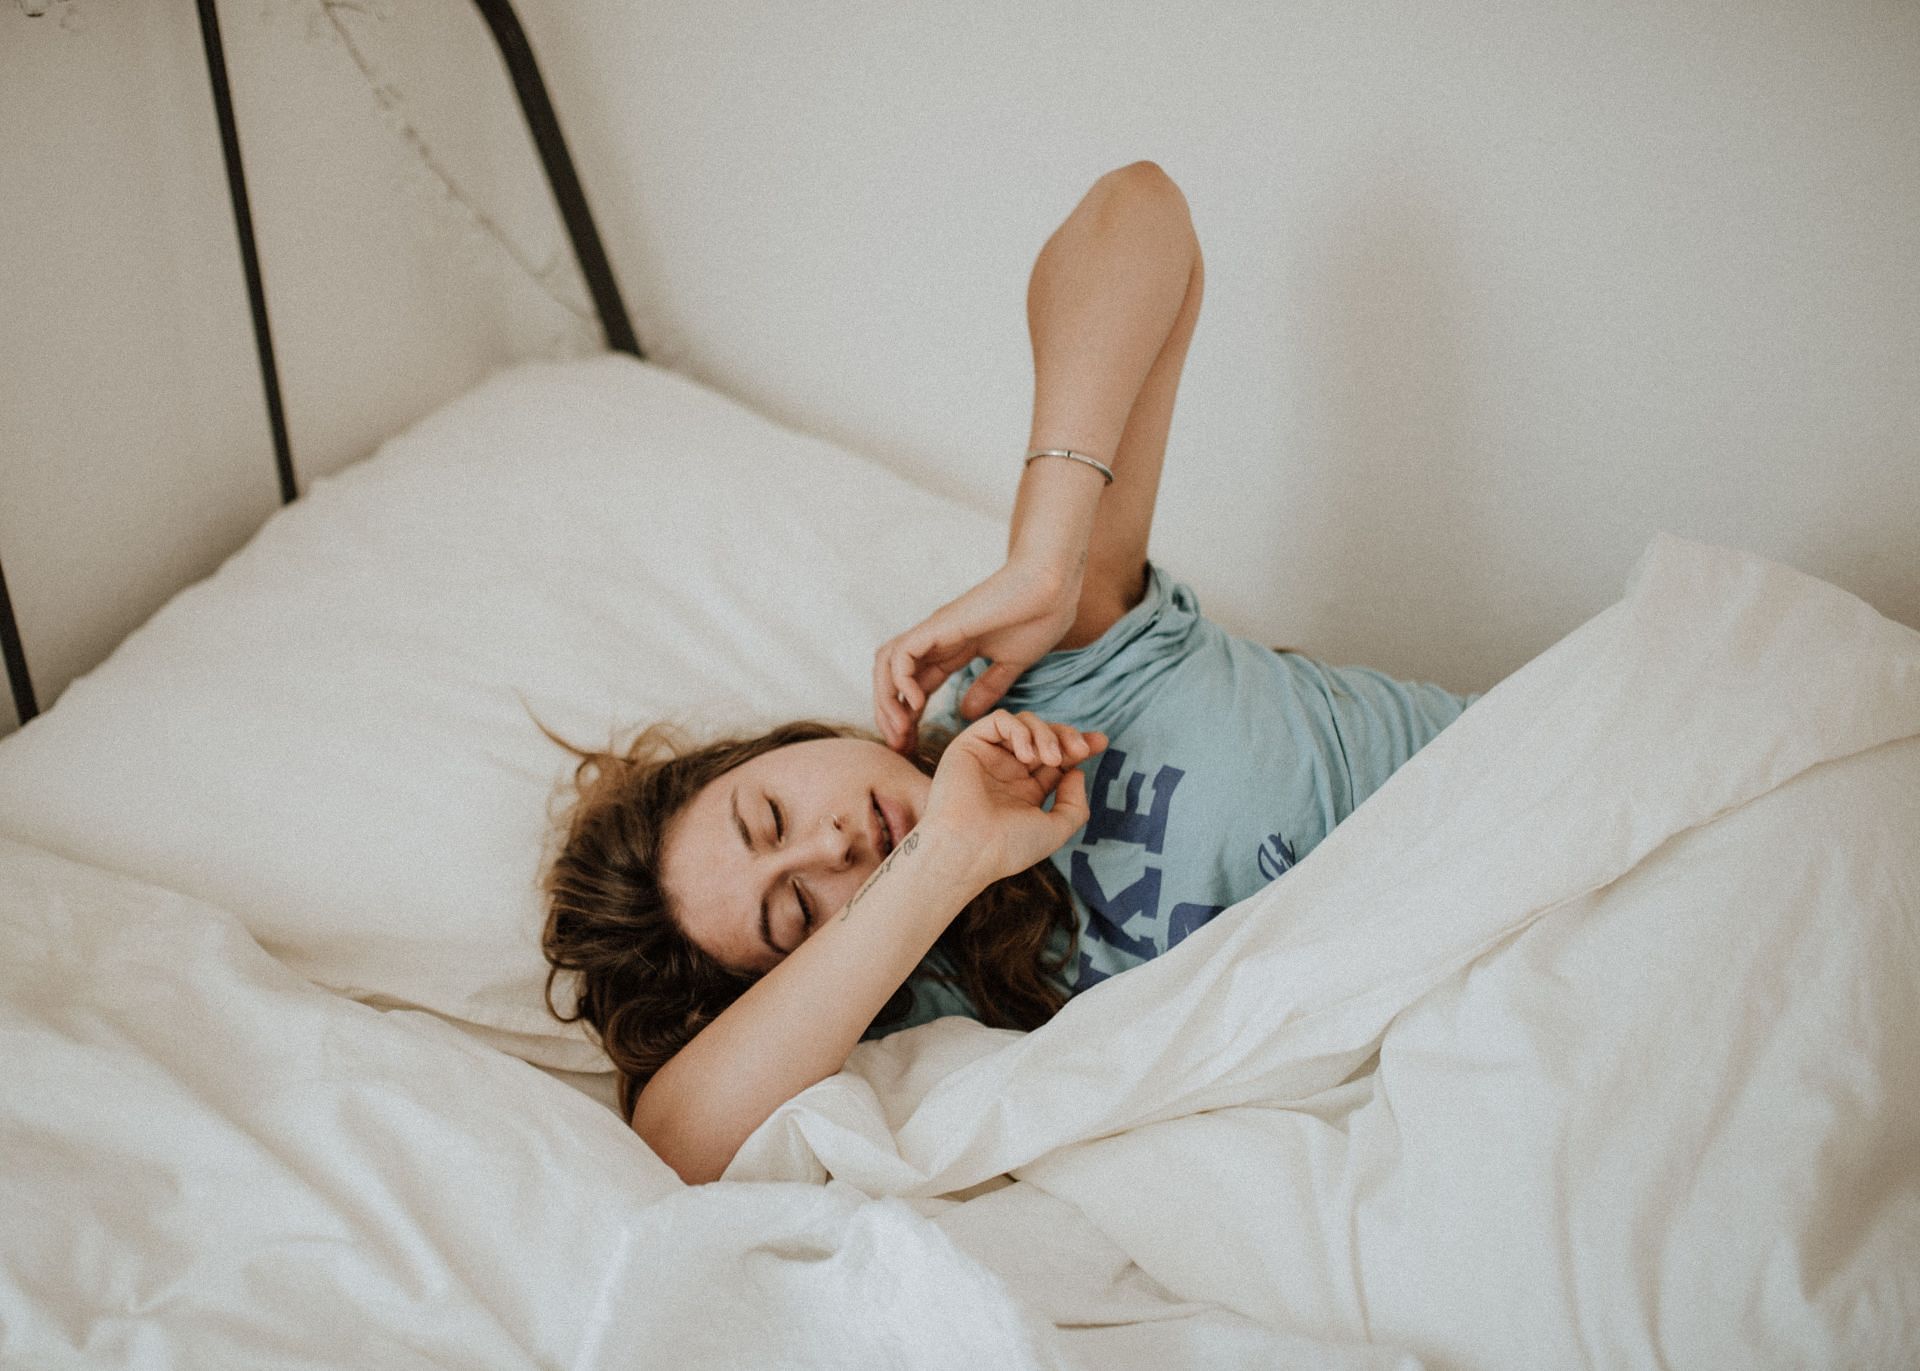 For some, sleeping on the side can cause shoulder pain. (Image via Unsplash/Kinga Howard)